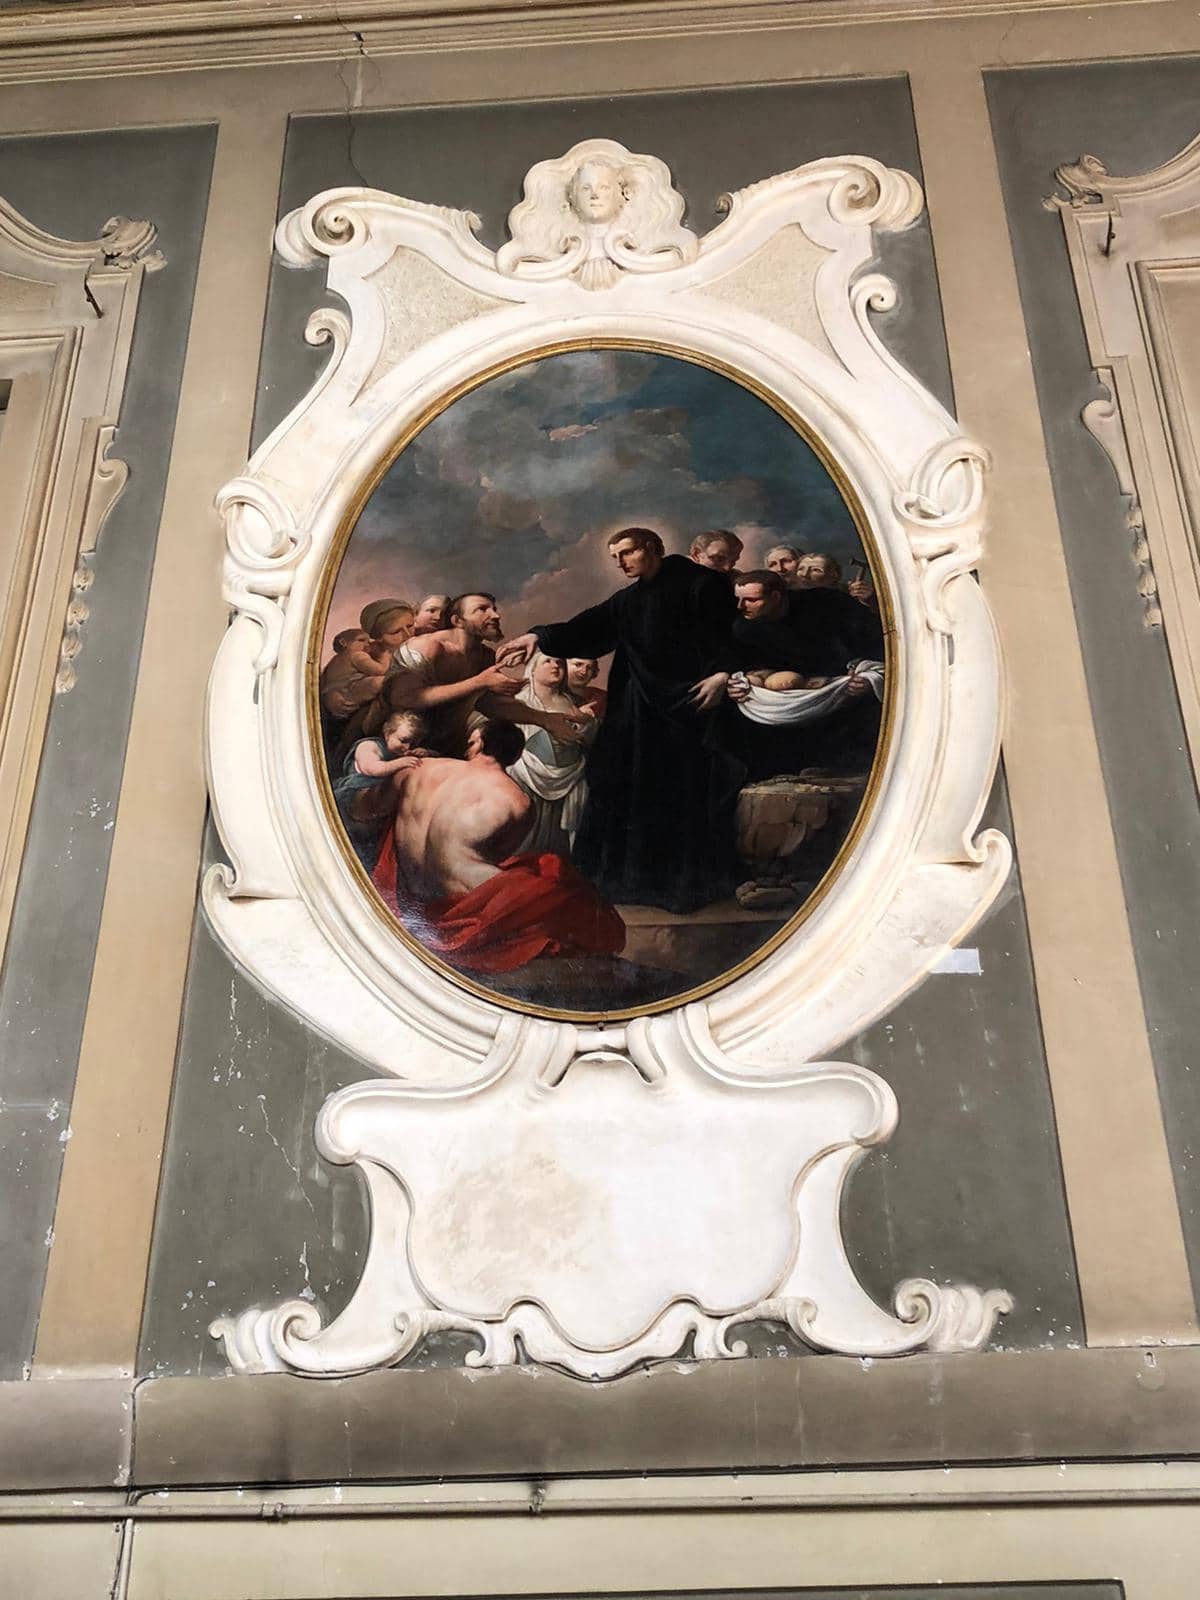 An oval painting in an elaborate marble frame, part of an architectural decoration. In the painting, a man in a long black robe hands bread to one of the many people gathered around him. Behind the group is a cloudy sky.